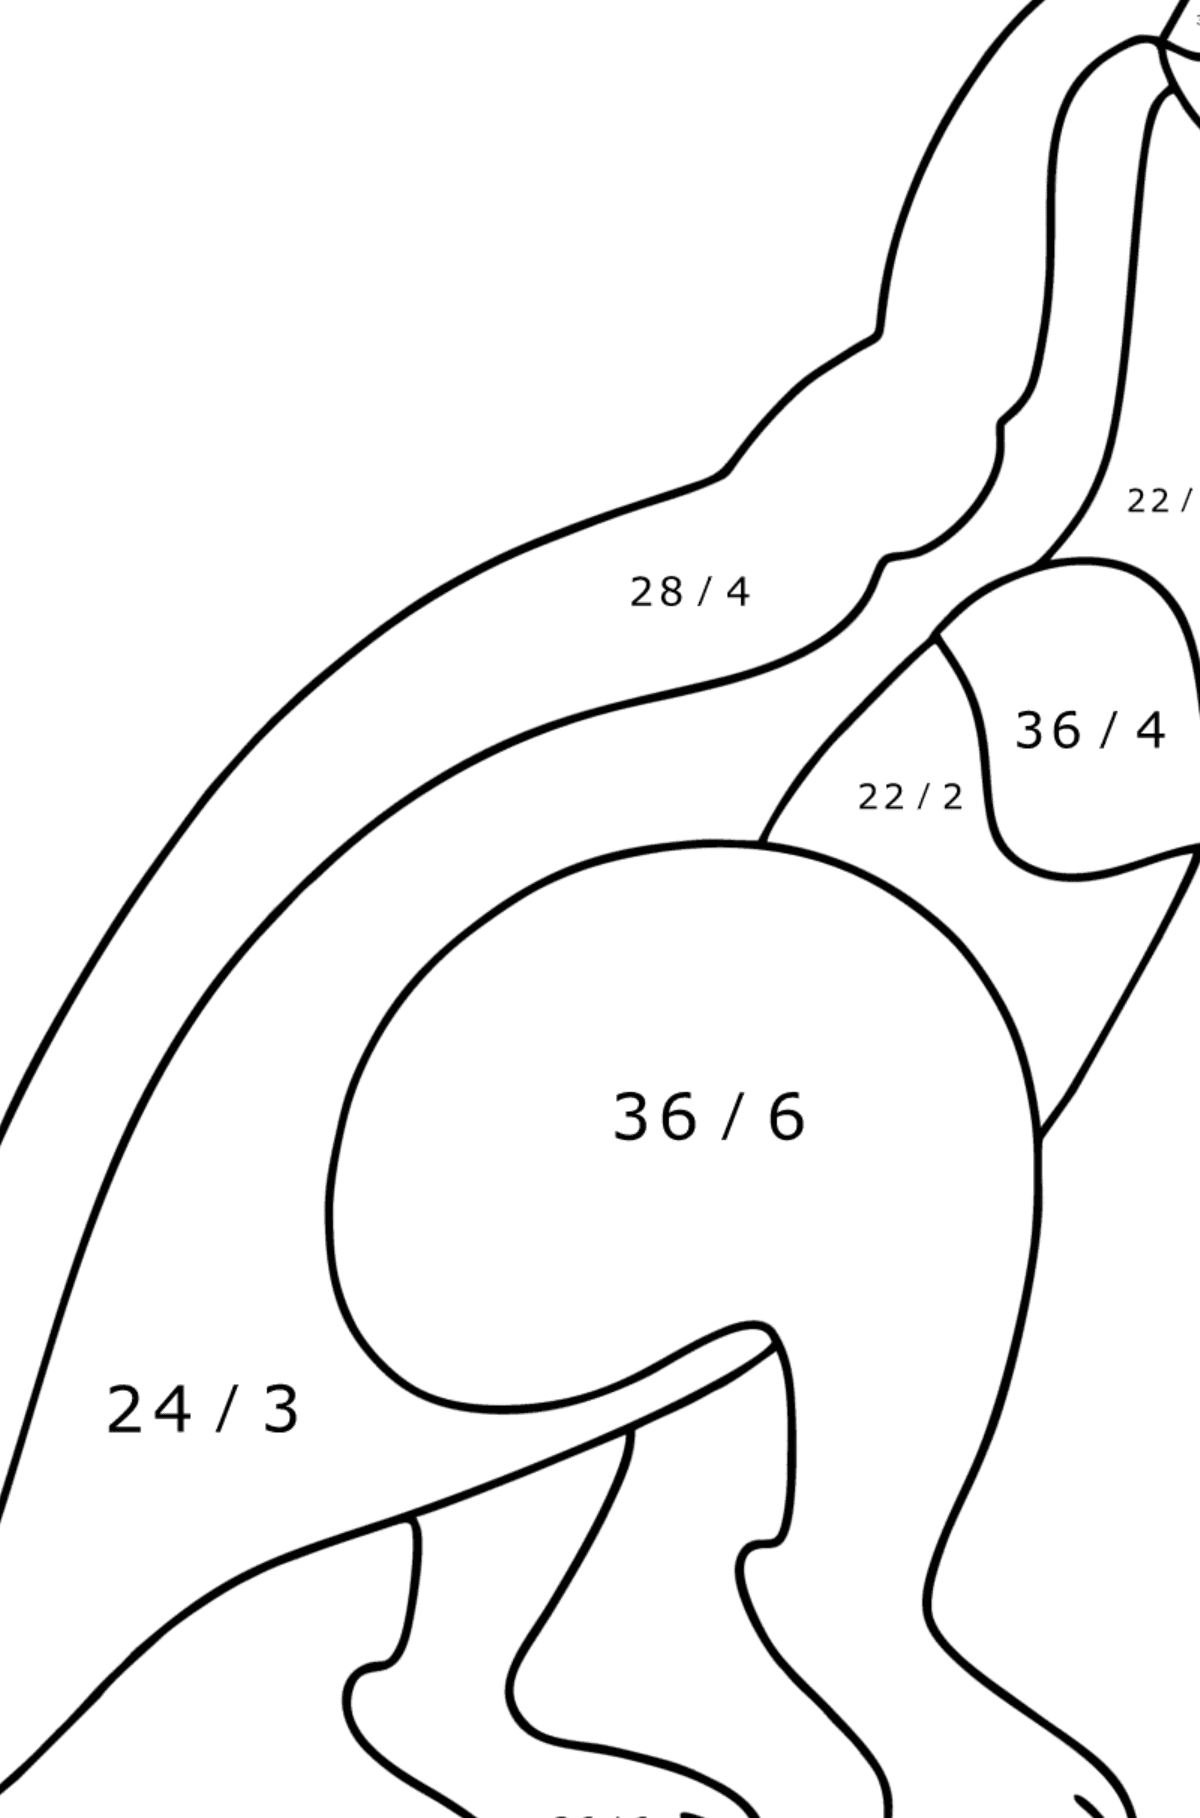 Agilisaurus coloring page - Math Coloring - Division for Kids